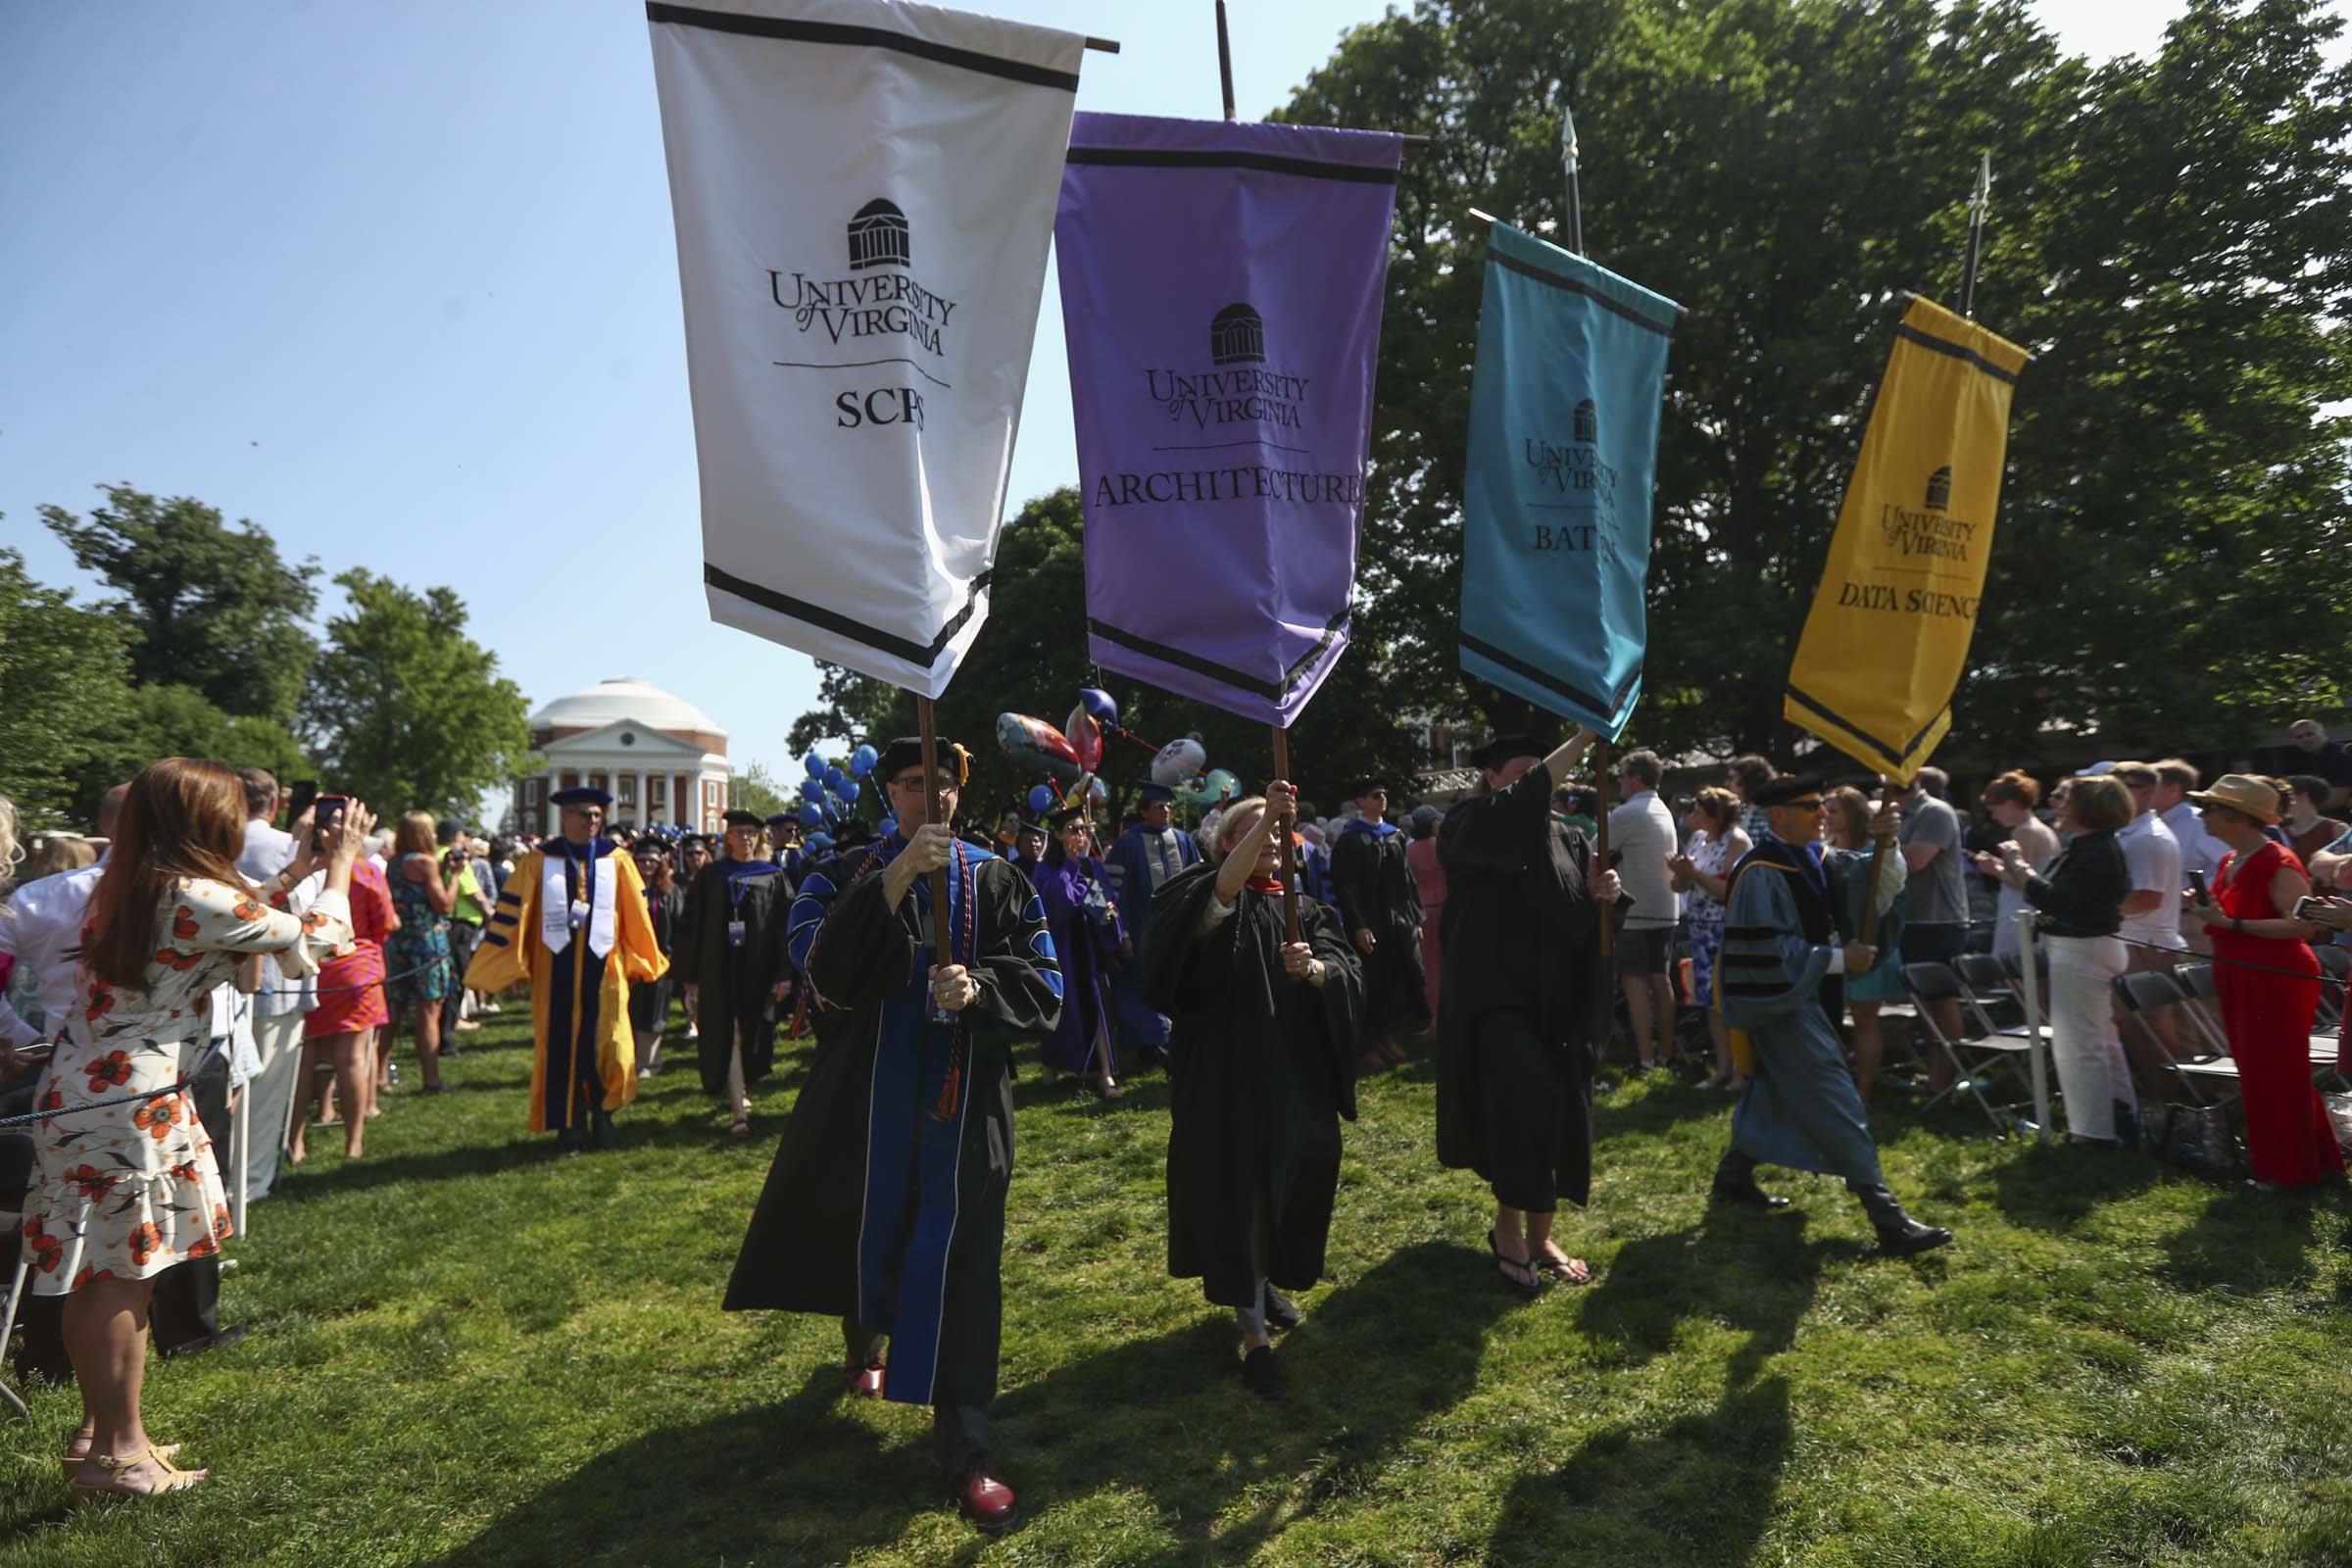 Standard-bearers hoisting the banners of four University schools lead their graduates across the Lawn.